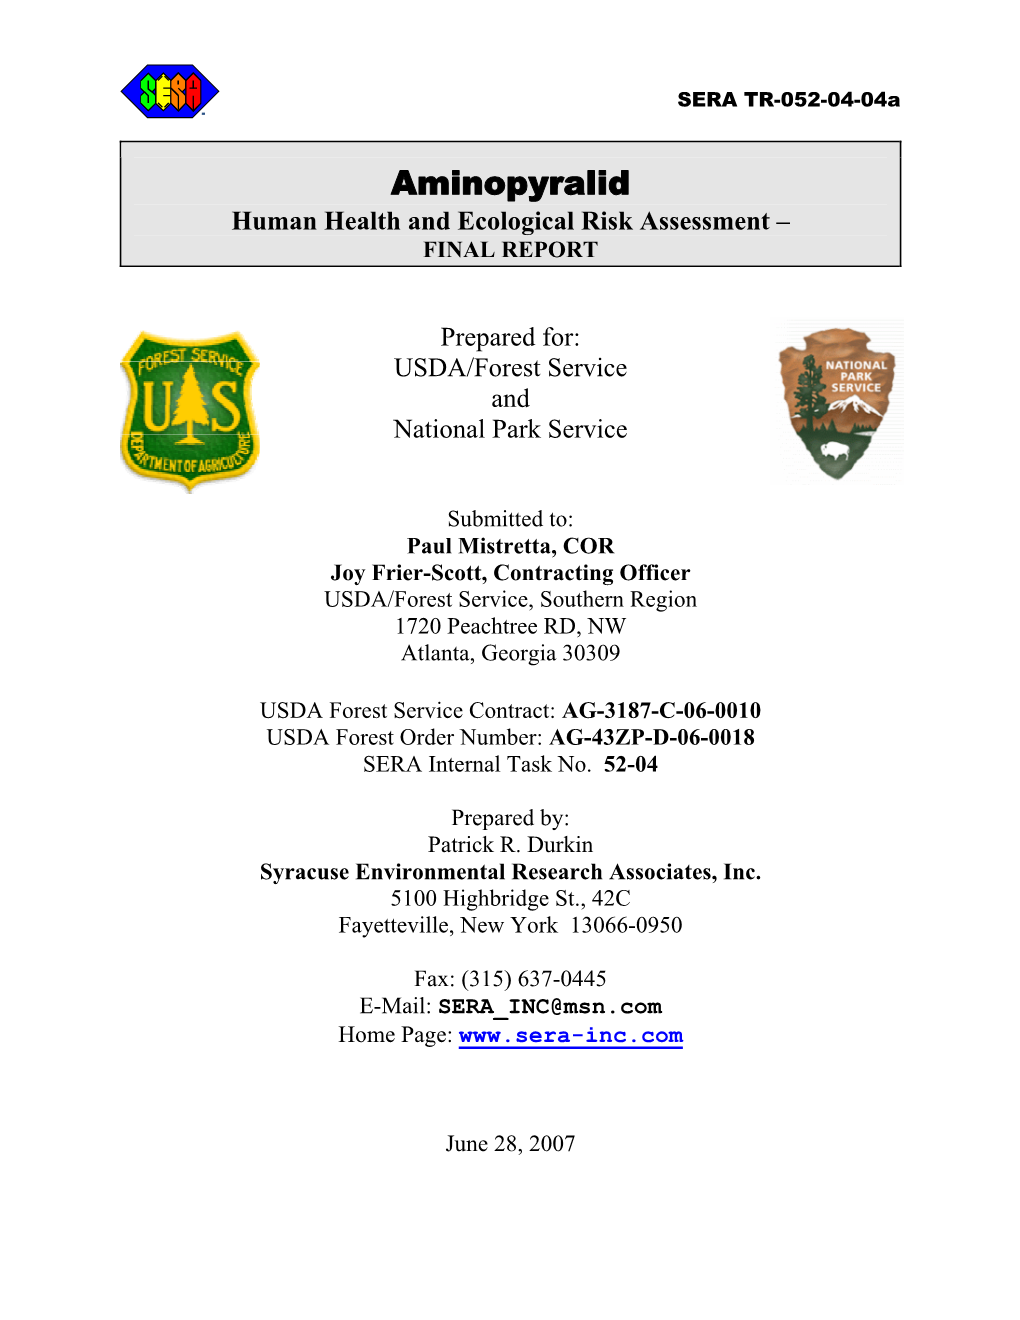 Aminopyralid Human Health and Ecological Risk Assessment – FINAL REPORT